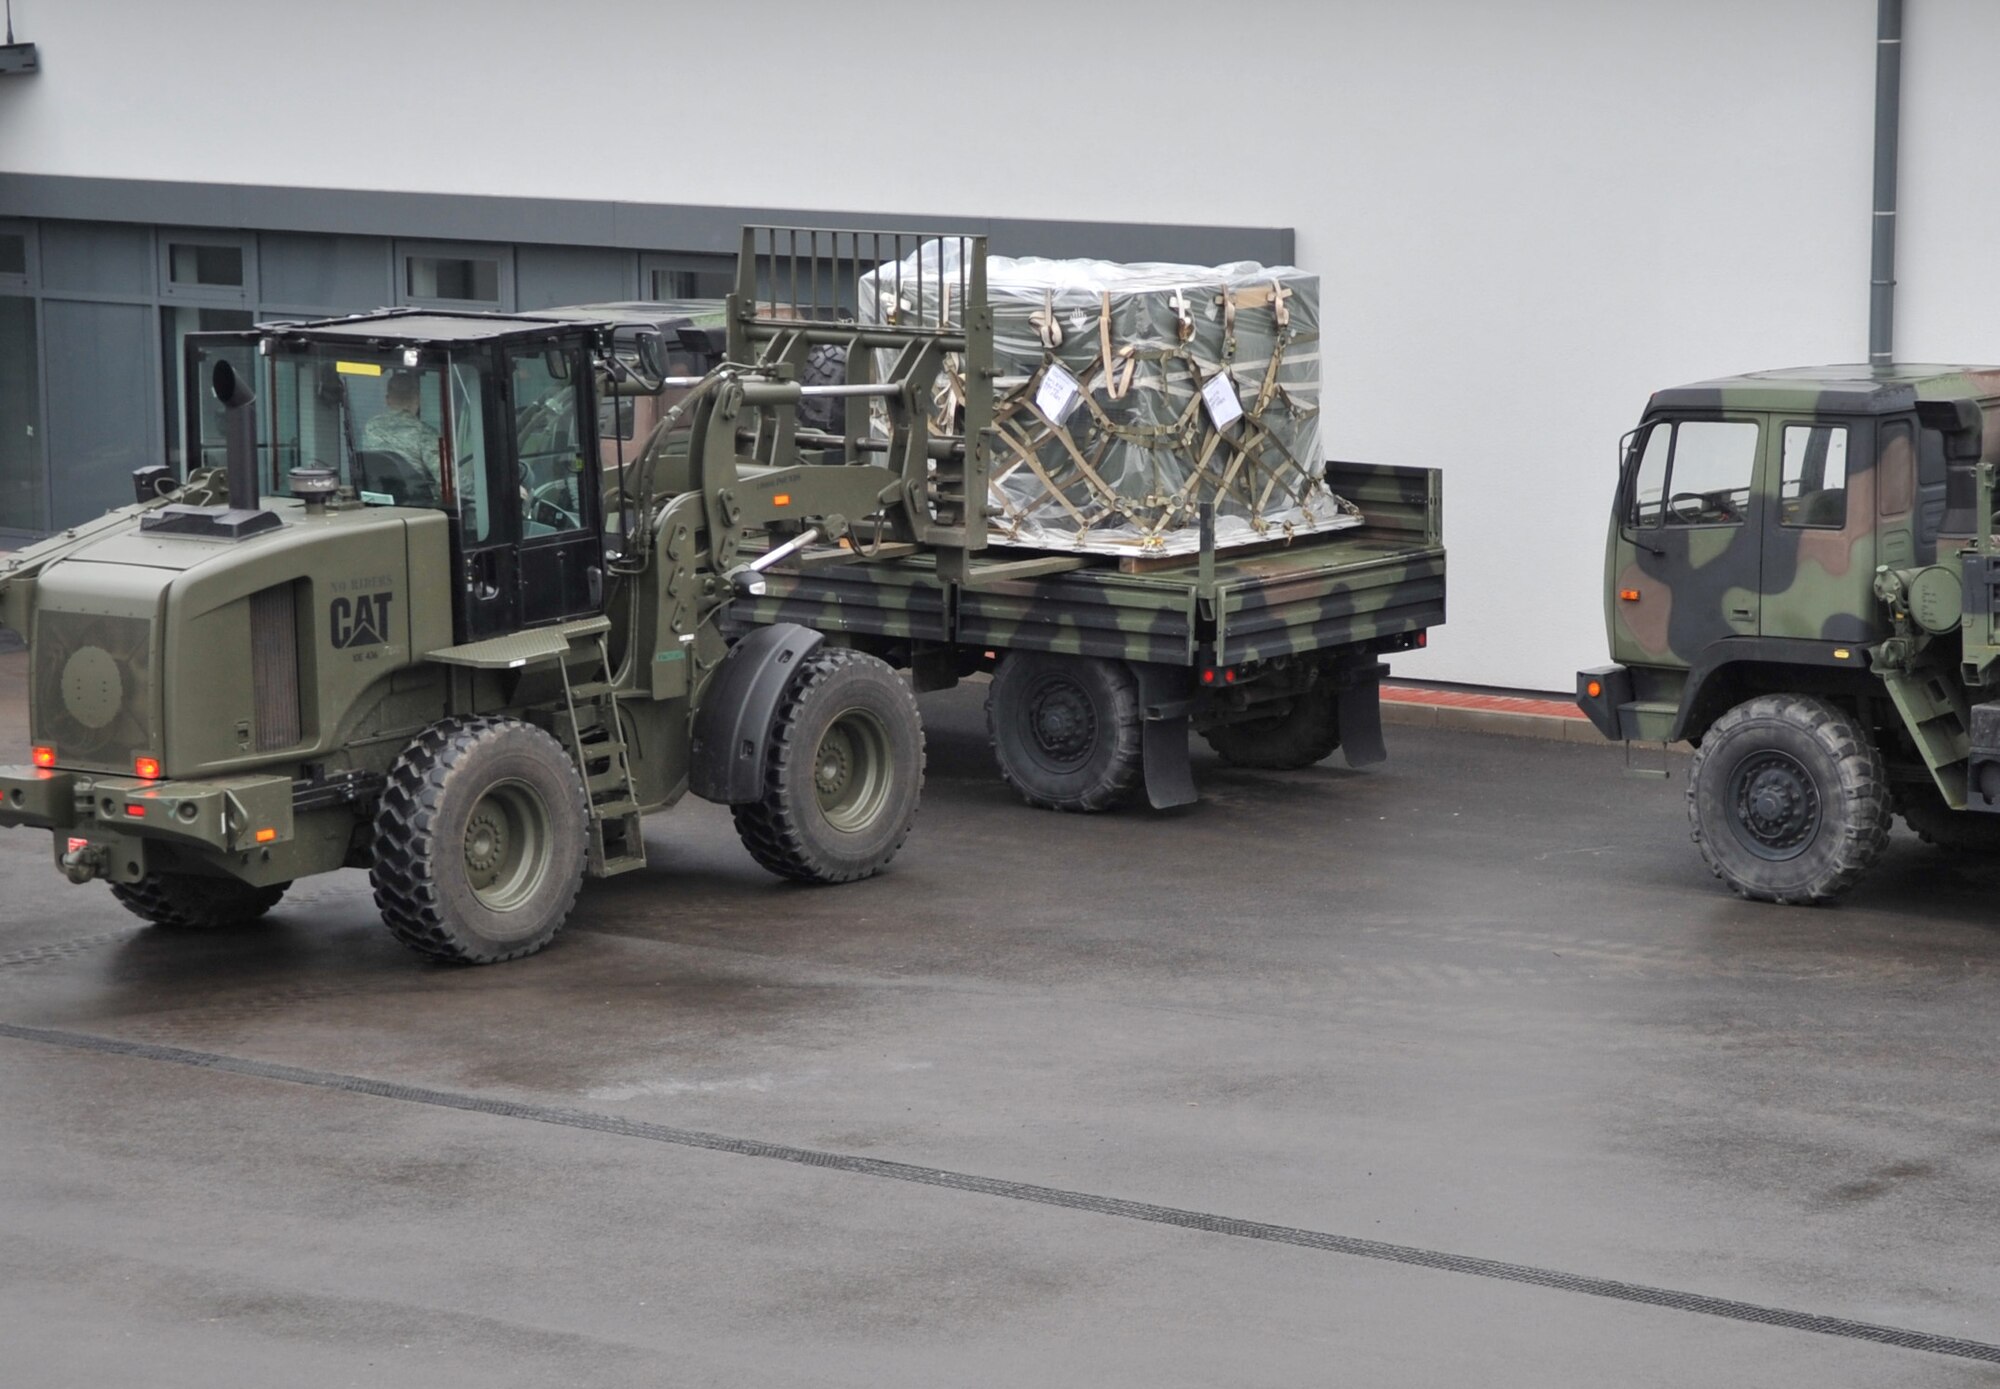 U.S. Air Force Airman 1st Class Philip Smouse, 86th Logistics Readiness Squadron air transportation, unloads cargo for an in-check in support of Operation Unified Protector, Ramstein Air Base, Germany, April 1, 2011. Unified Protector is a NATO-led operation in Libya to protect civilians and civilian-populated areas under threat of attack. (U.S. Air Force photo by Senior Airman Caleb Pierce)